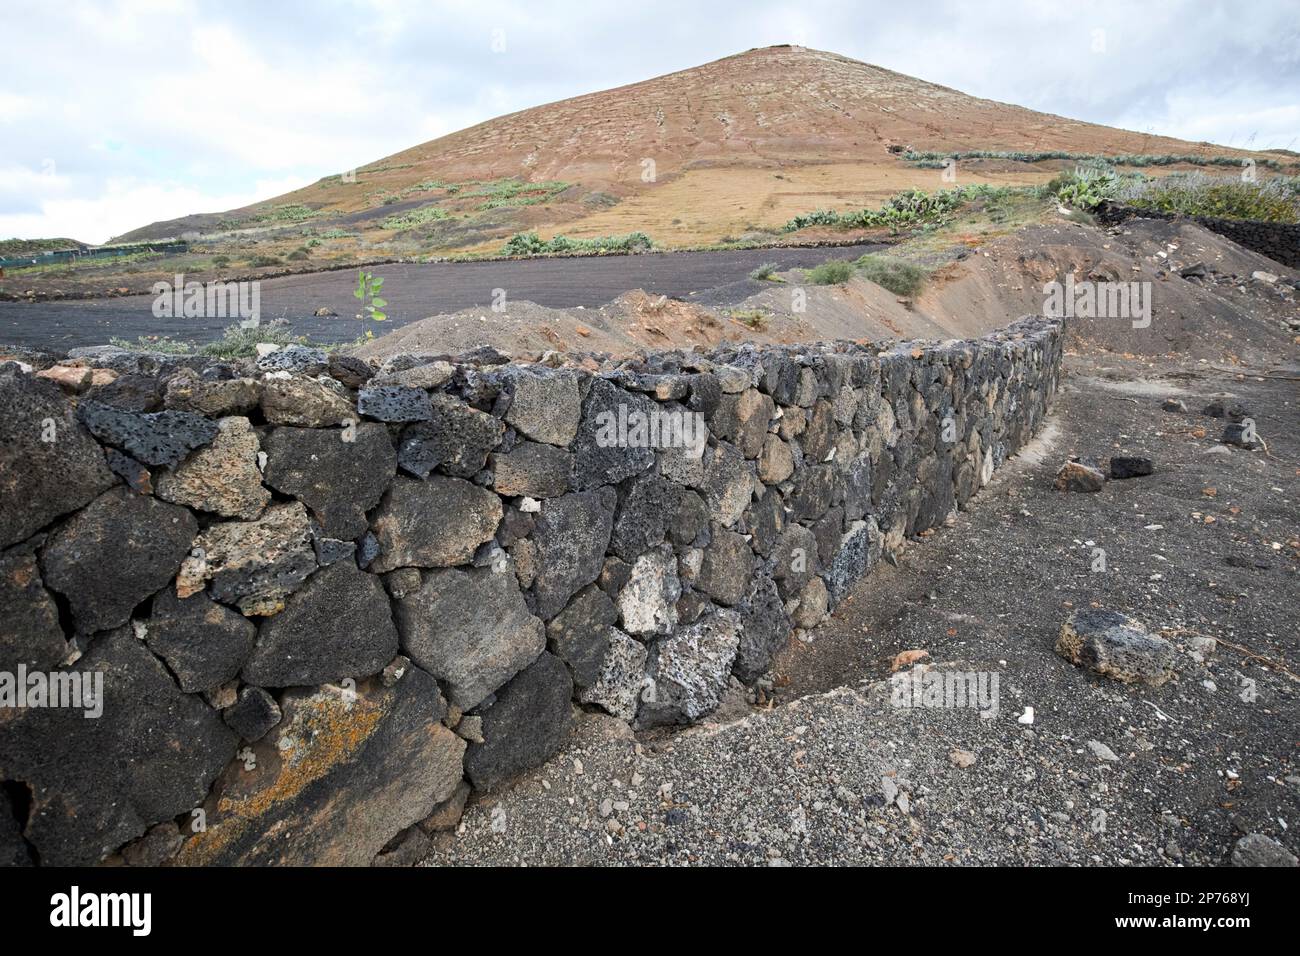 dry stone wall made out of volcanic rock under construction at the edge of a field near a volcano in Lanzarote, Canary Islands, Spain Stock Photo